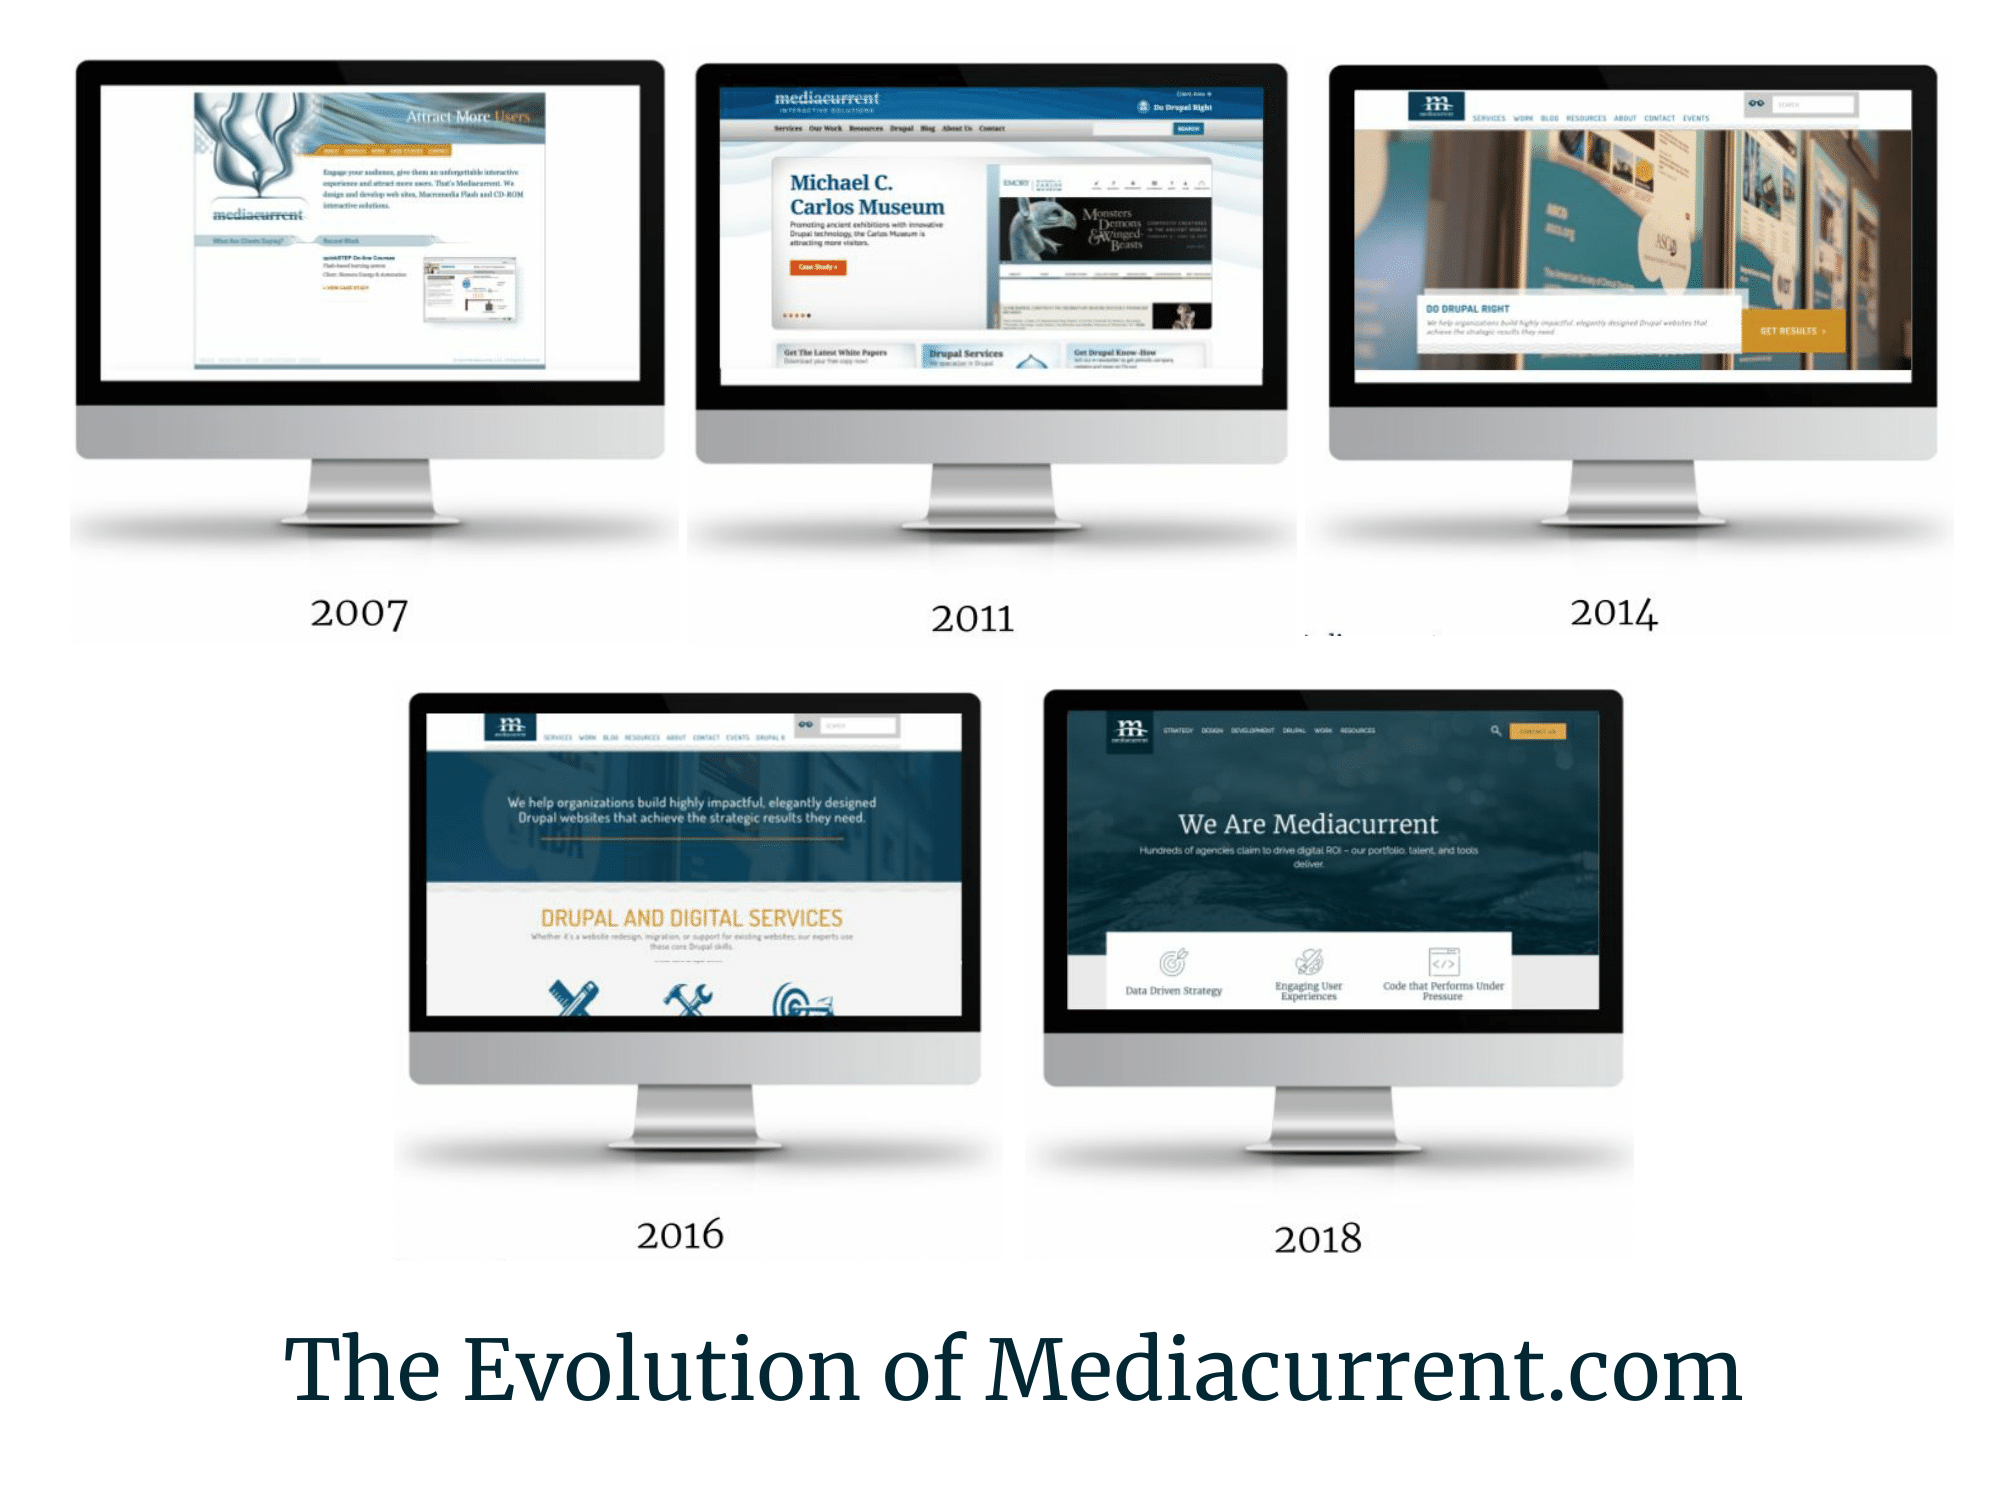 screenshots of the Mediacurrent.com homepage from 2007 to present